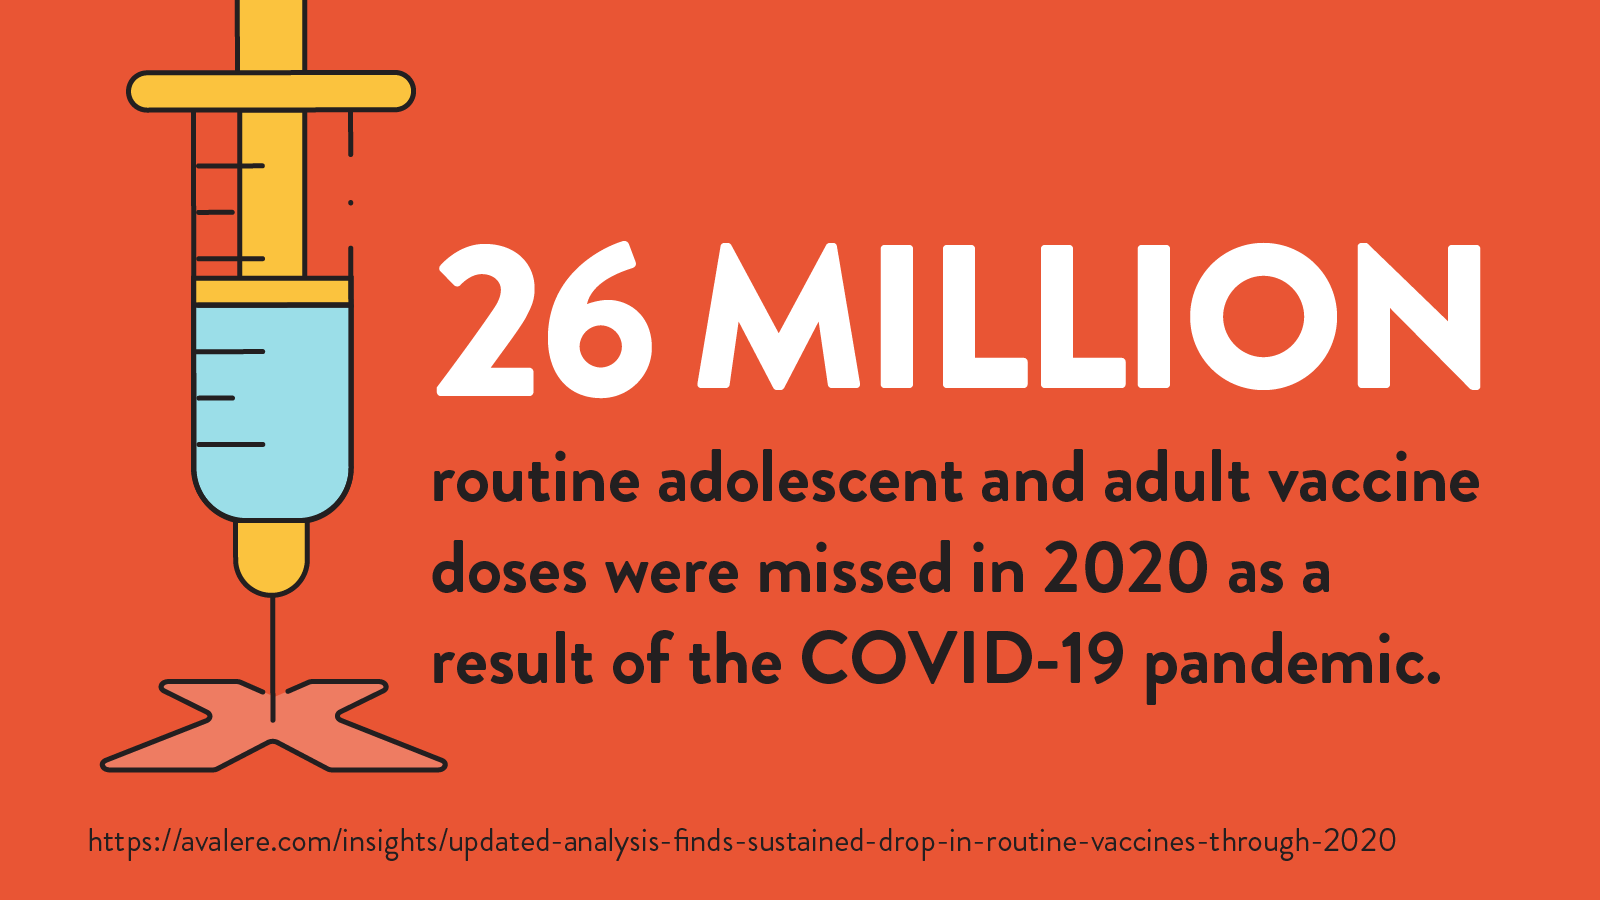 Cartoon image of a vaccine syringe pointing to an "X". Text reads, "26 million routine adolescent and adult vaccine doses were missed in 2020 as a result of the COVID-19 pandemic."